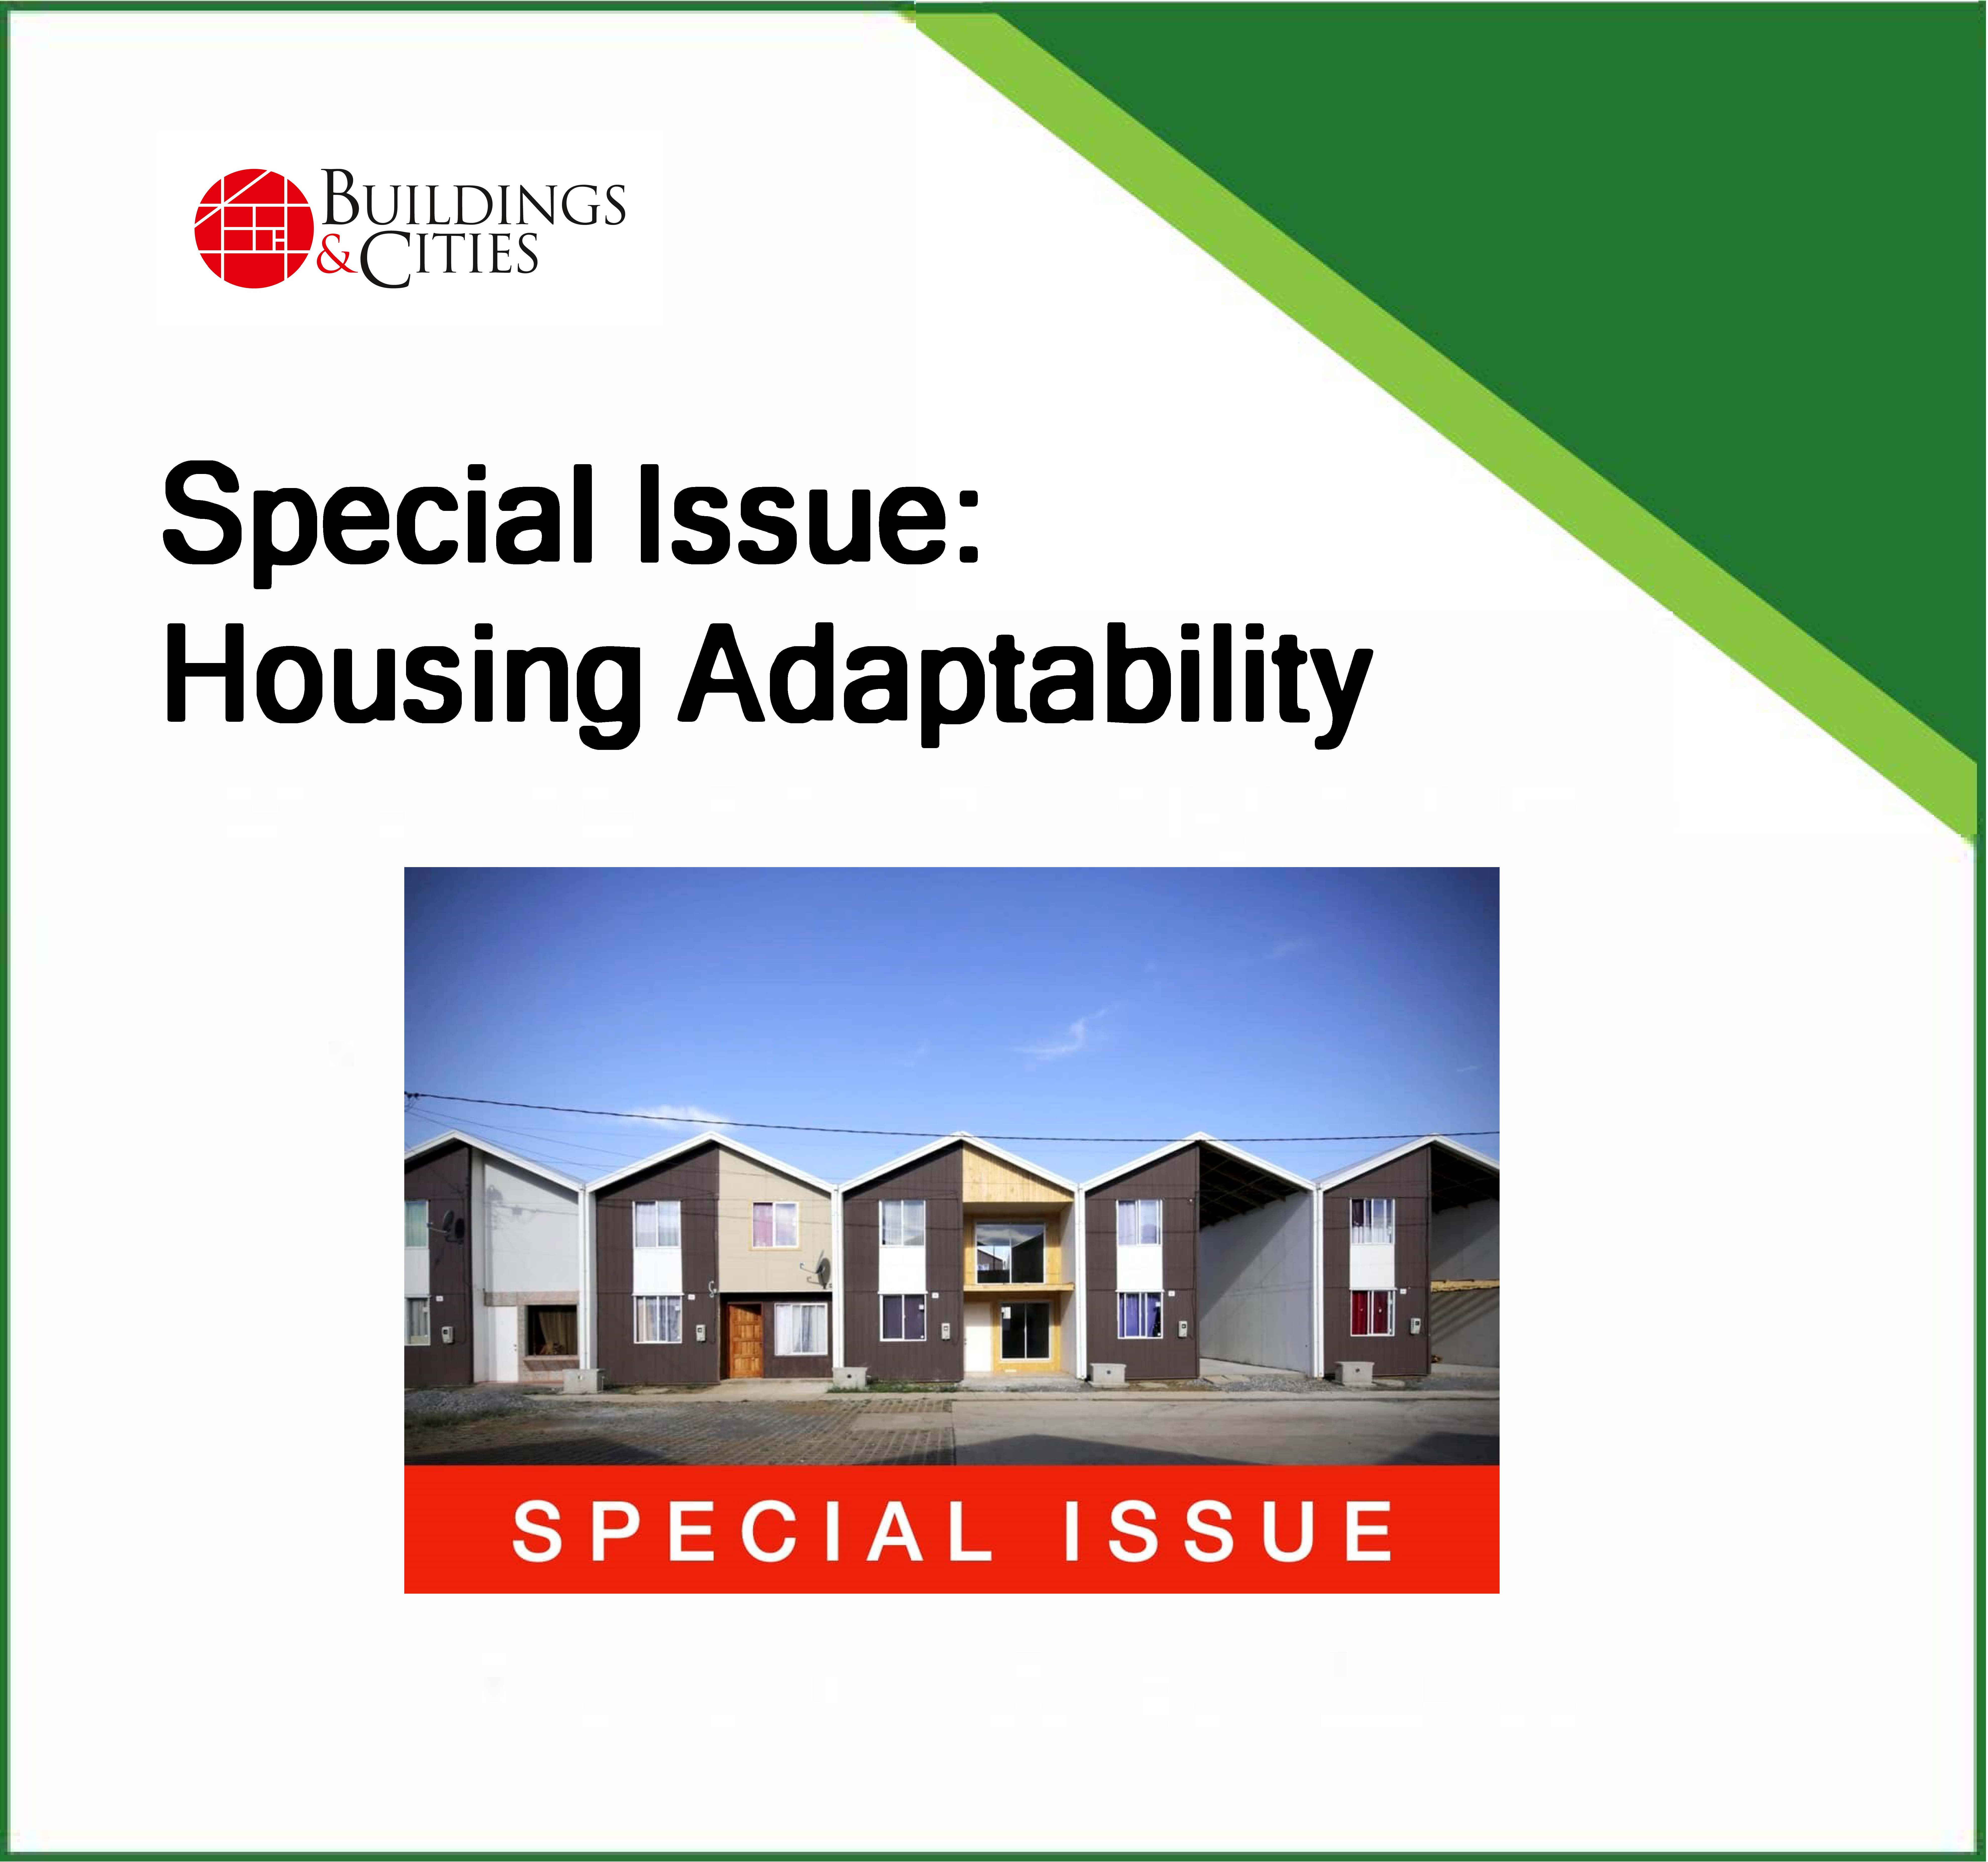 Special Issue: Housing Adaptability